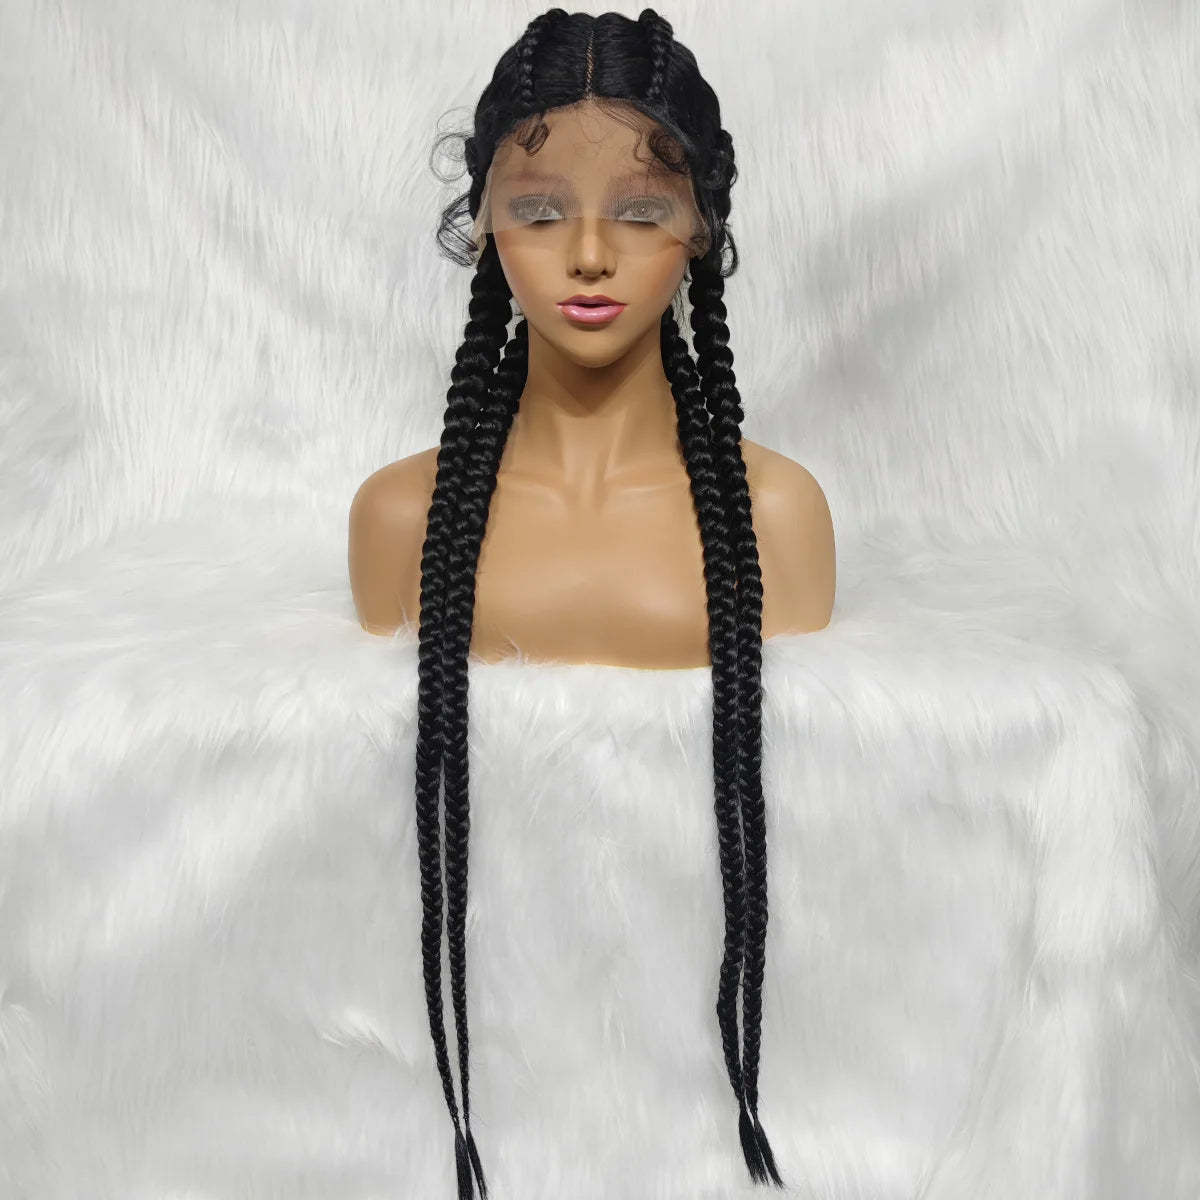 Synthetic Lace Wig Braided, 37 Inches, Black Burgundy